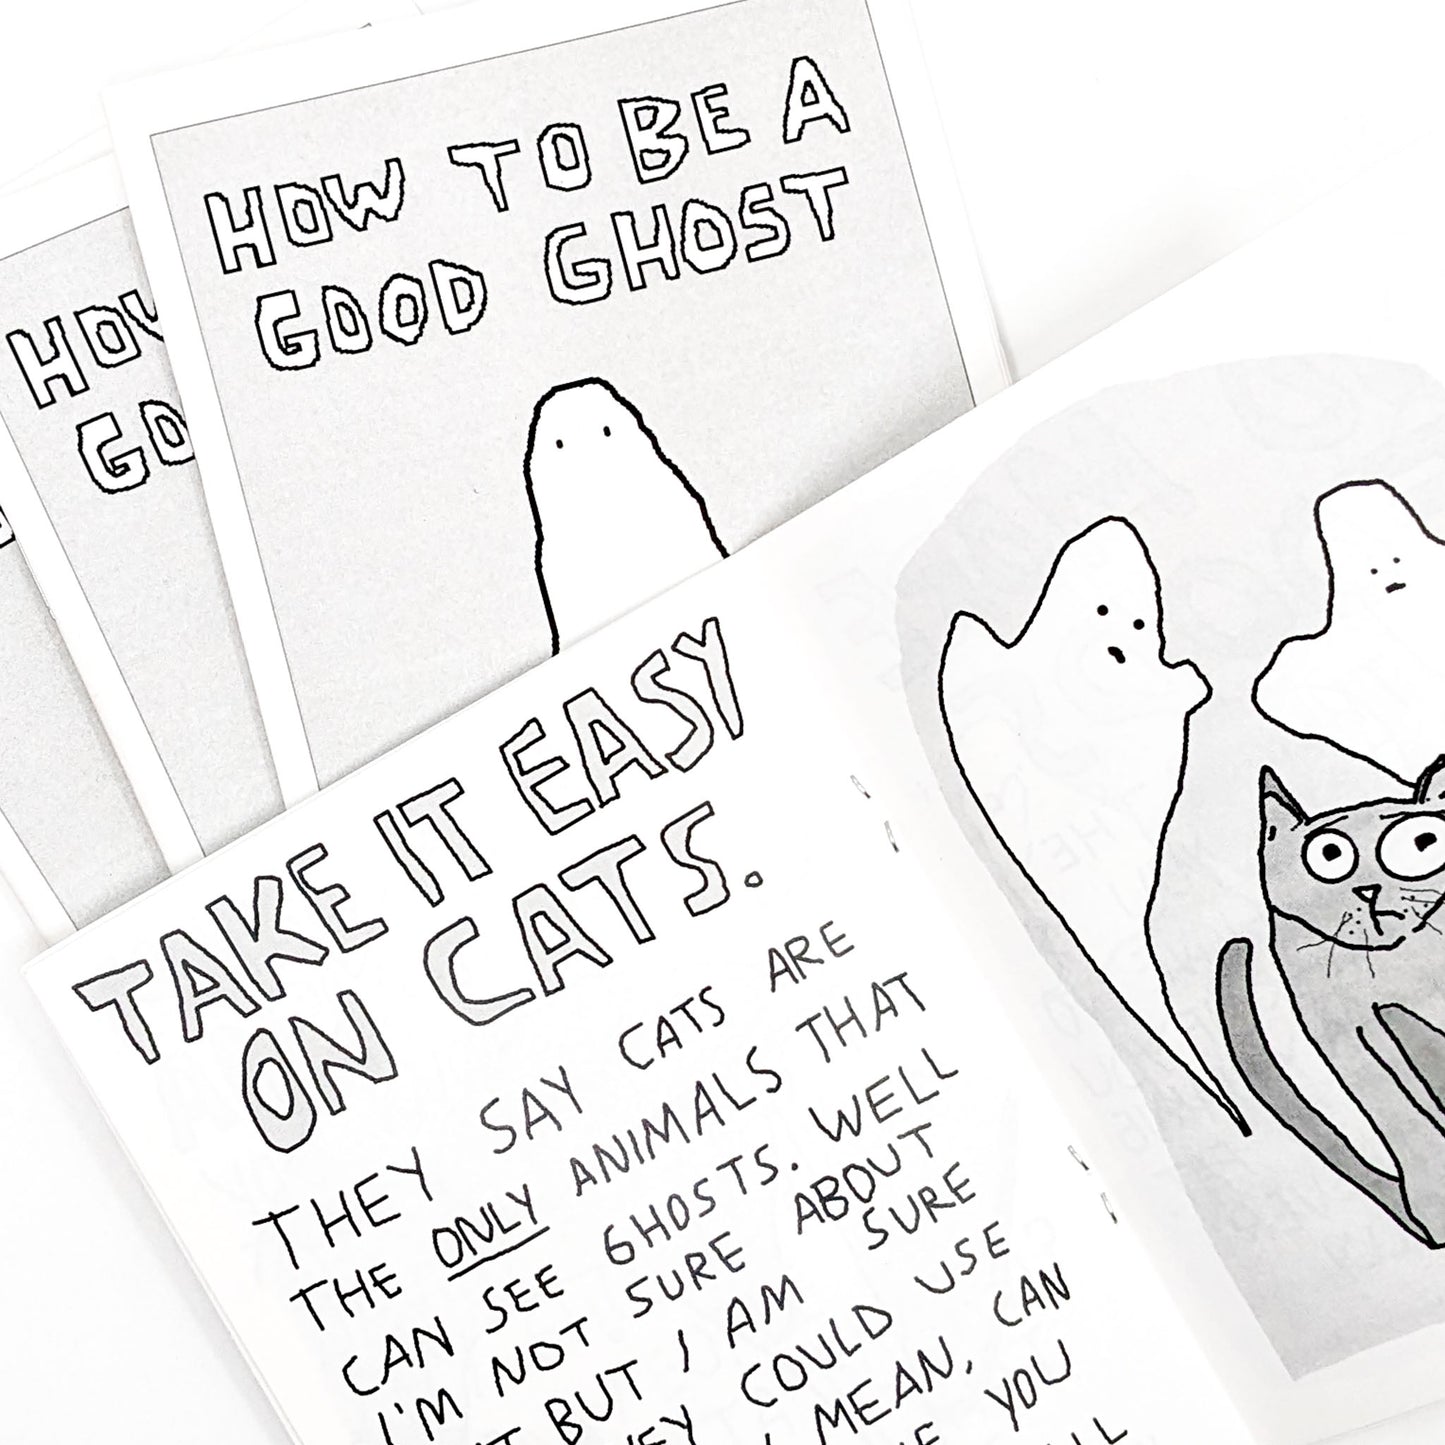 How to Be a Good Ghost- Zine